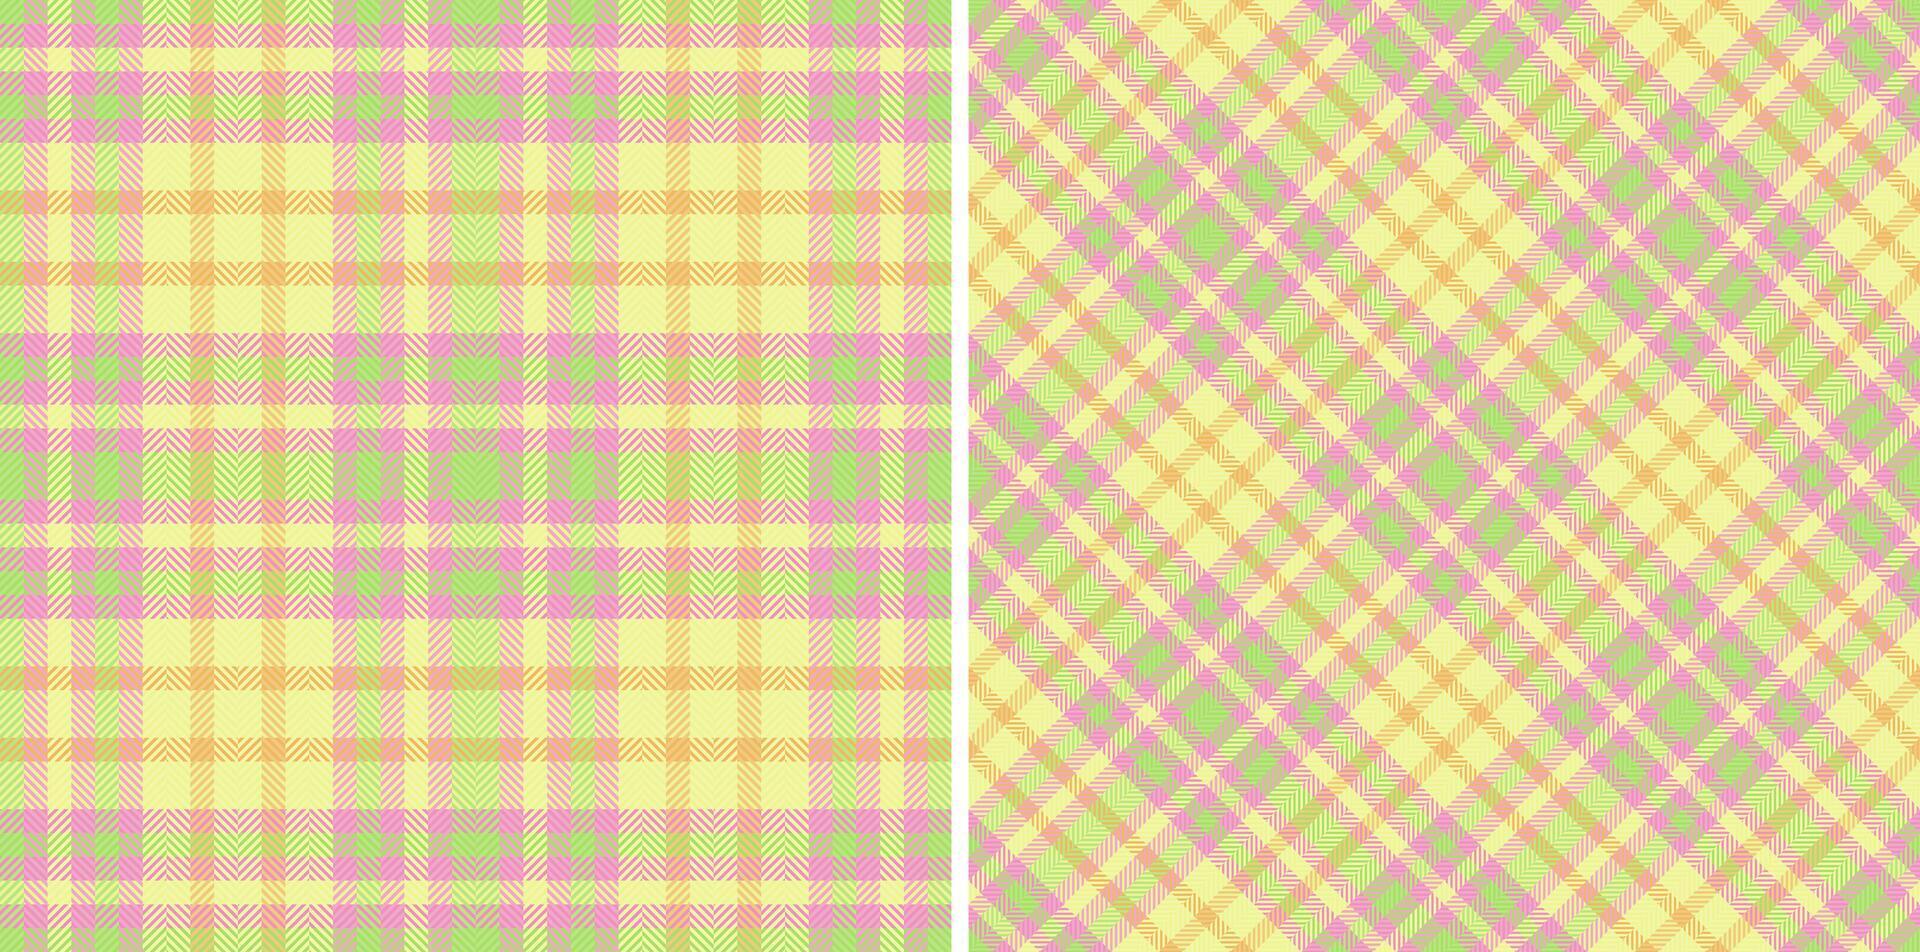 Plaid tartan check of texture vector fabric with a background seamless pattern textile. Set in spring colors. Creative gift wrapping ideas for special occasions.